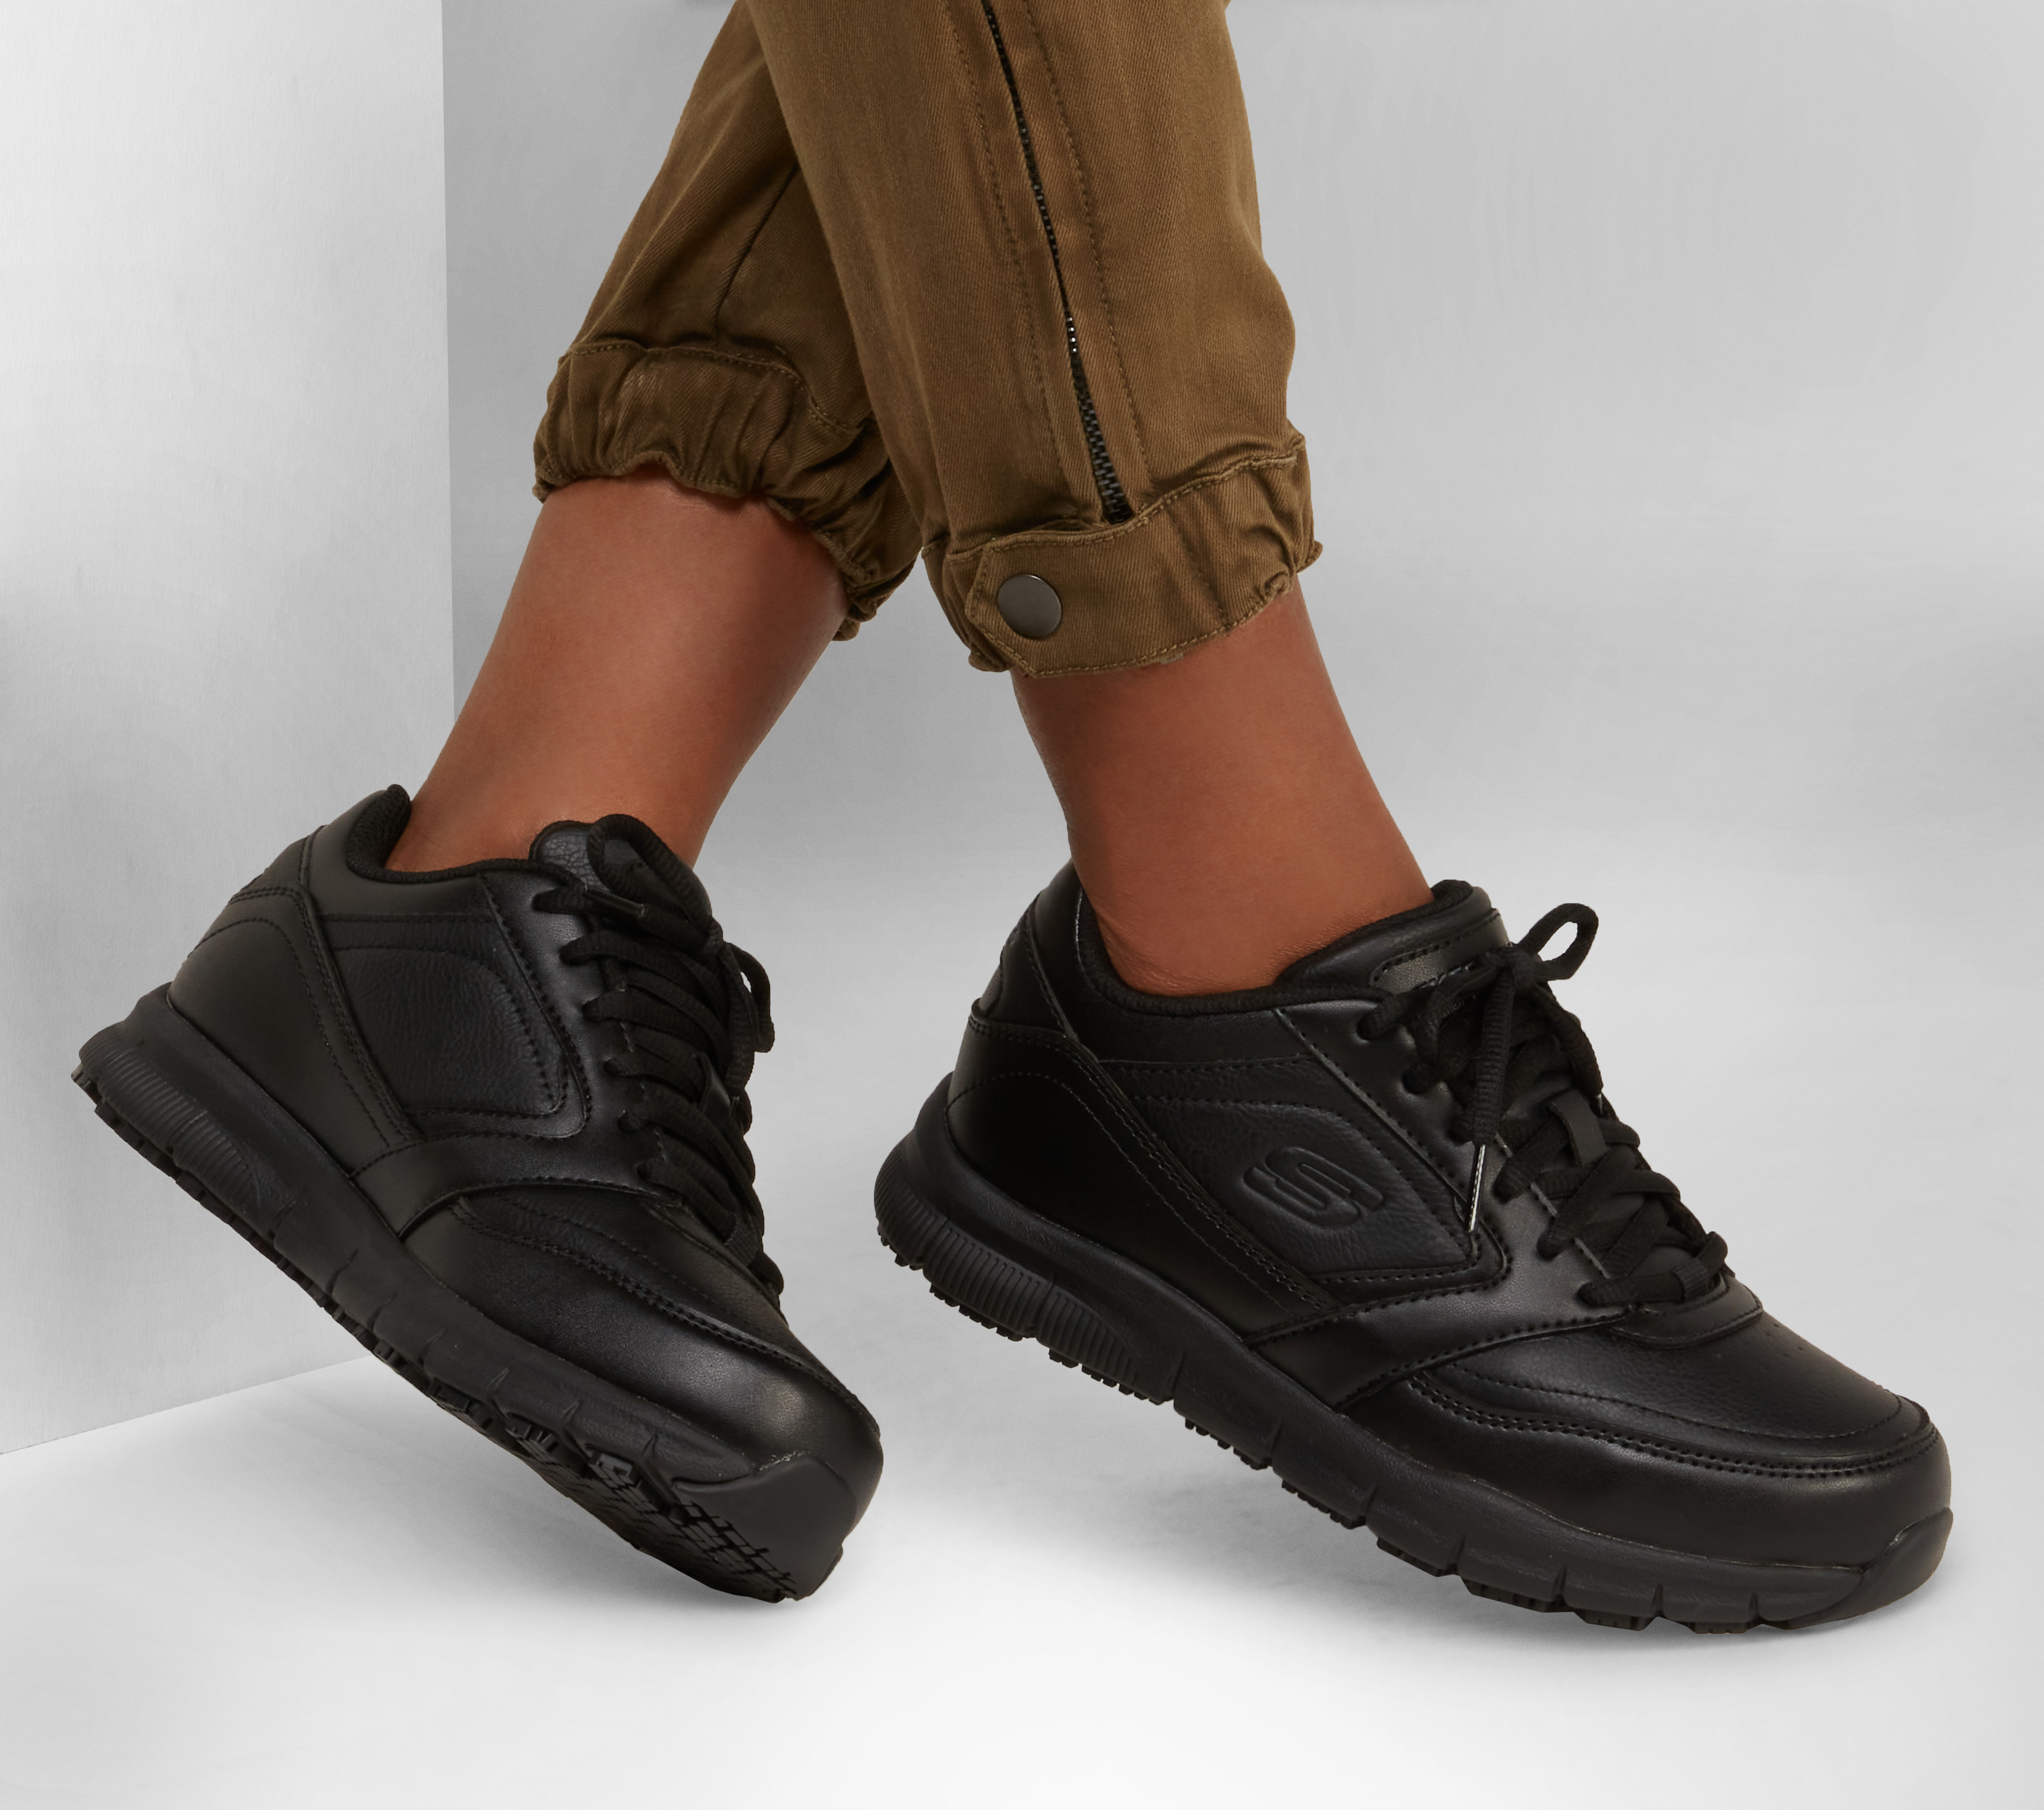 SR Work Relaxed - Wyola Nampa SKECHERS | Fit: